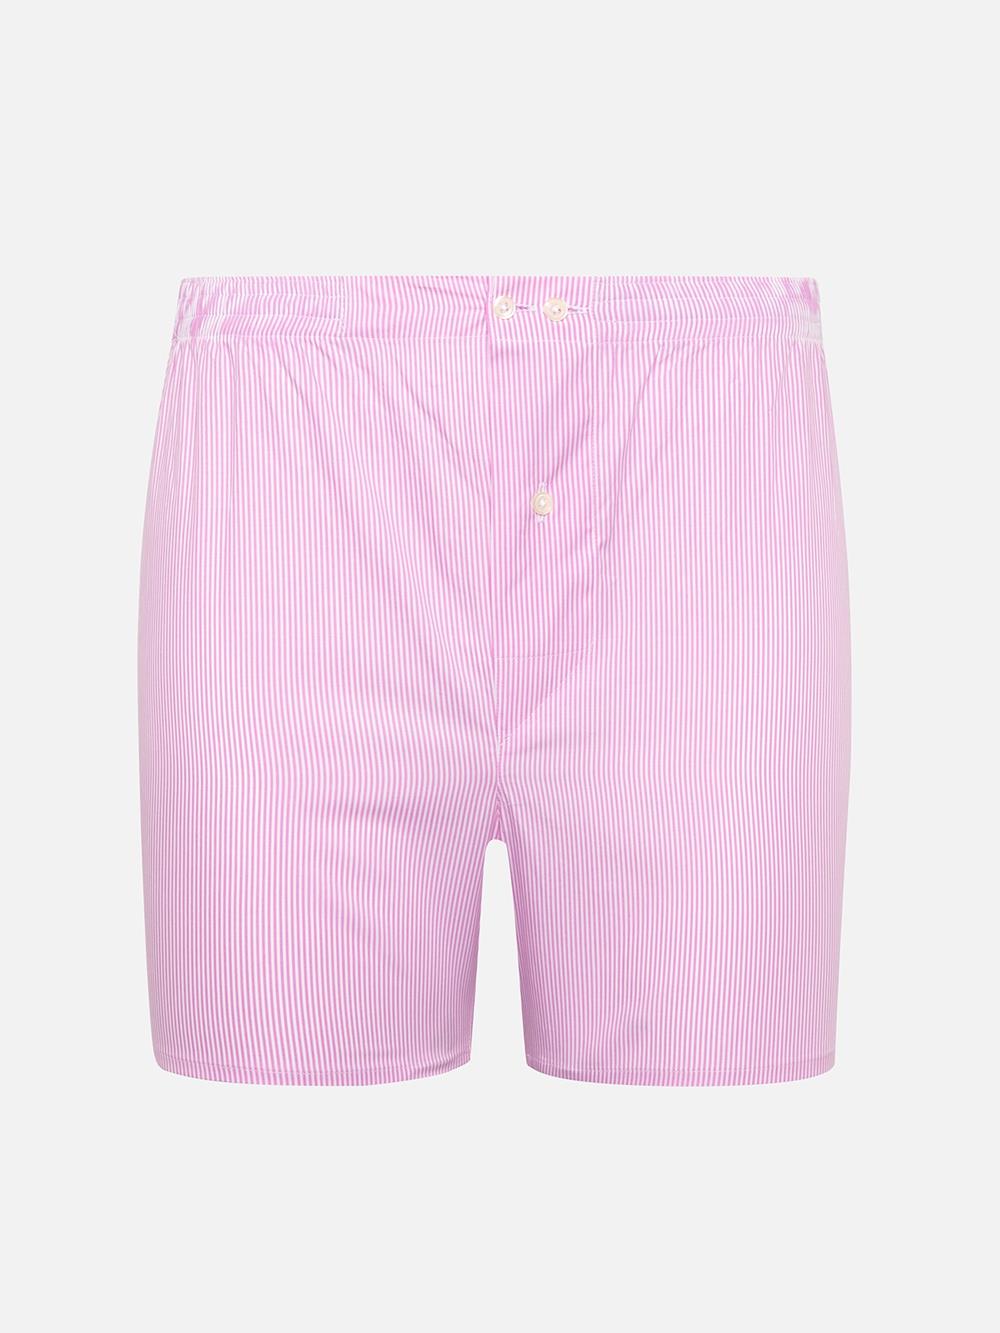 Menthon boxer shorts with pink stripes